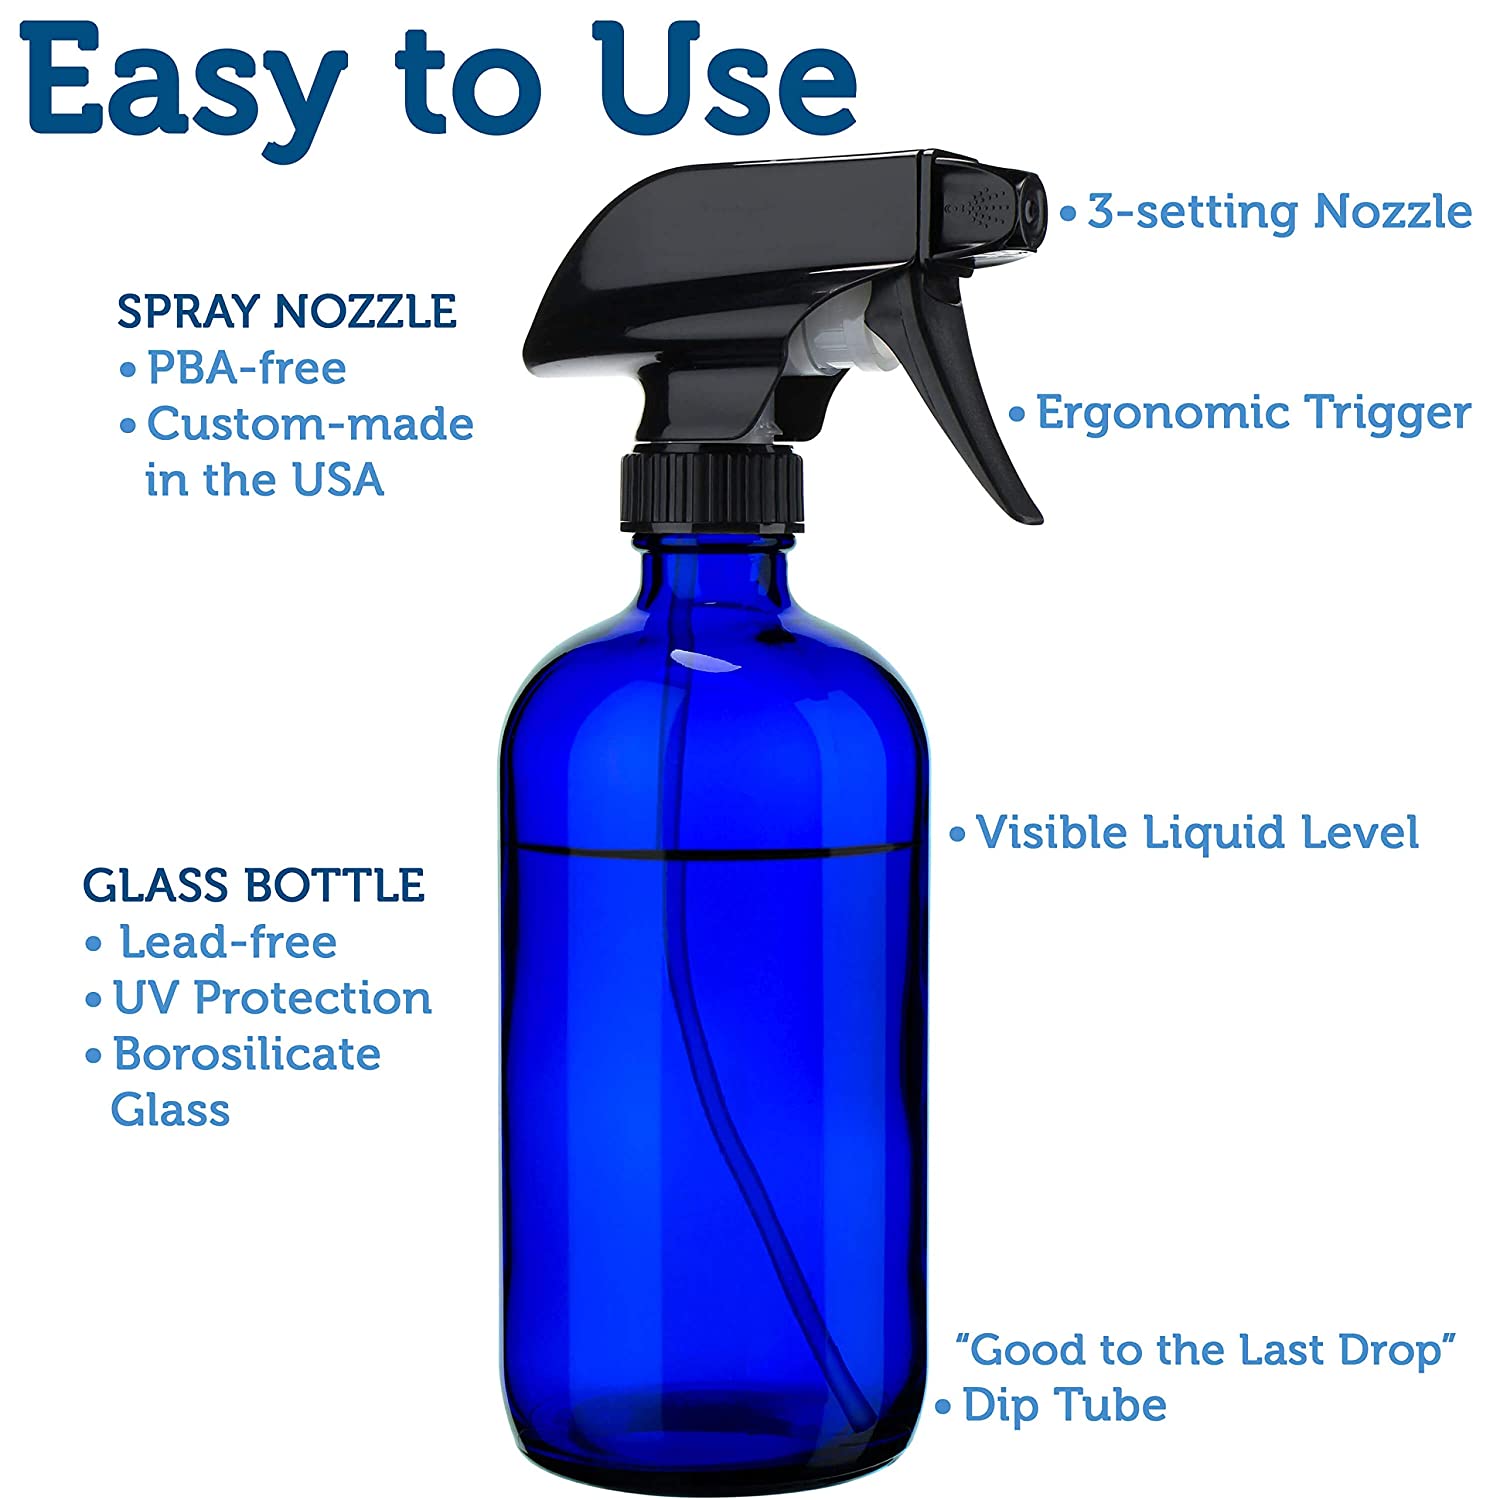 Empty Glass Spray Bottles for Cleaning Solutions (2PACK)